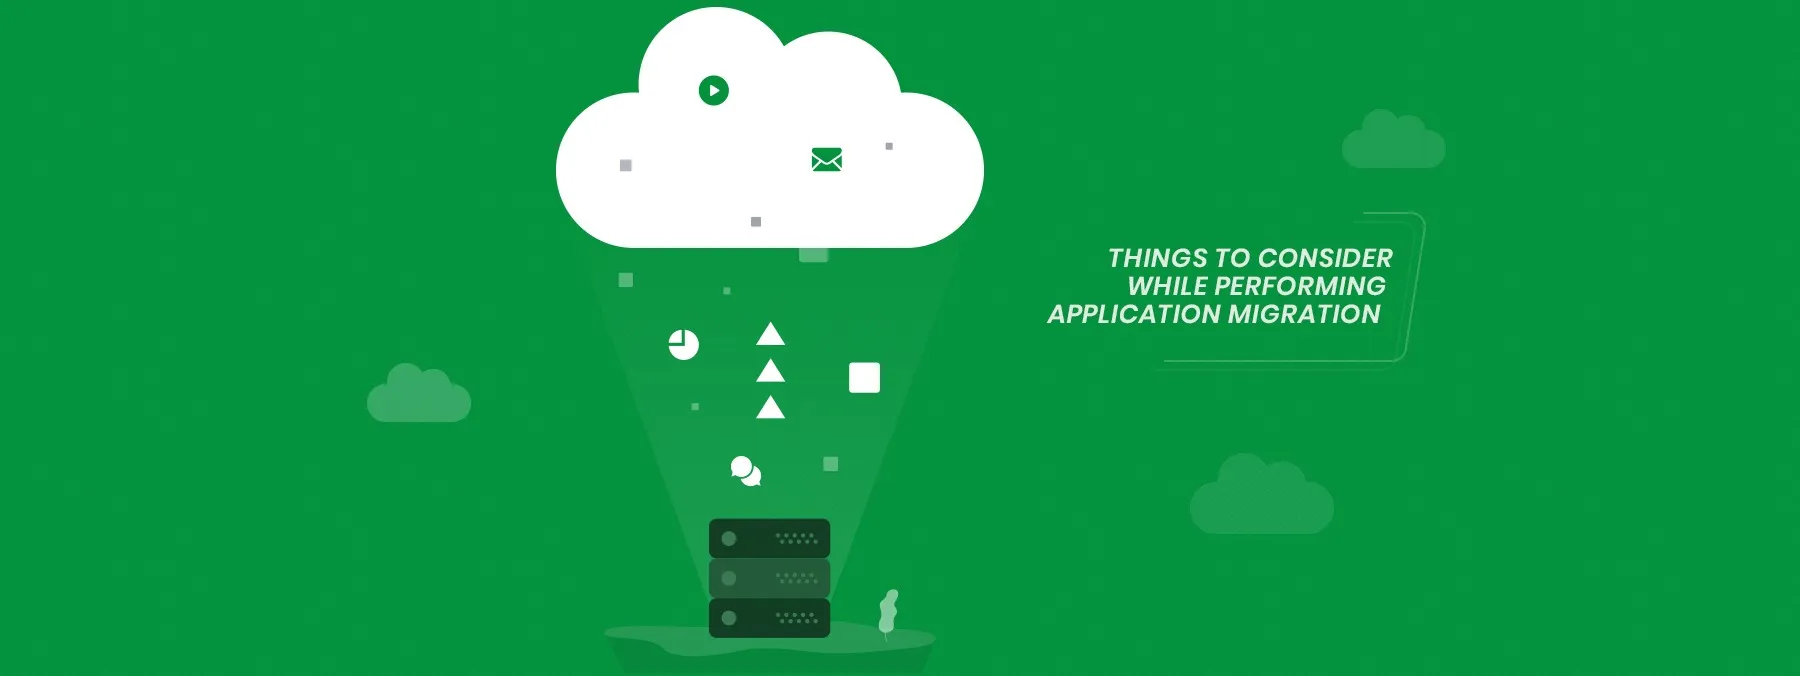 Application migration to the Cloud: Benefits and the Things to consider